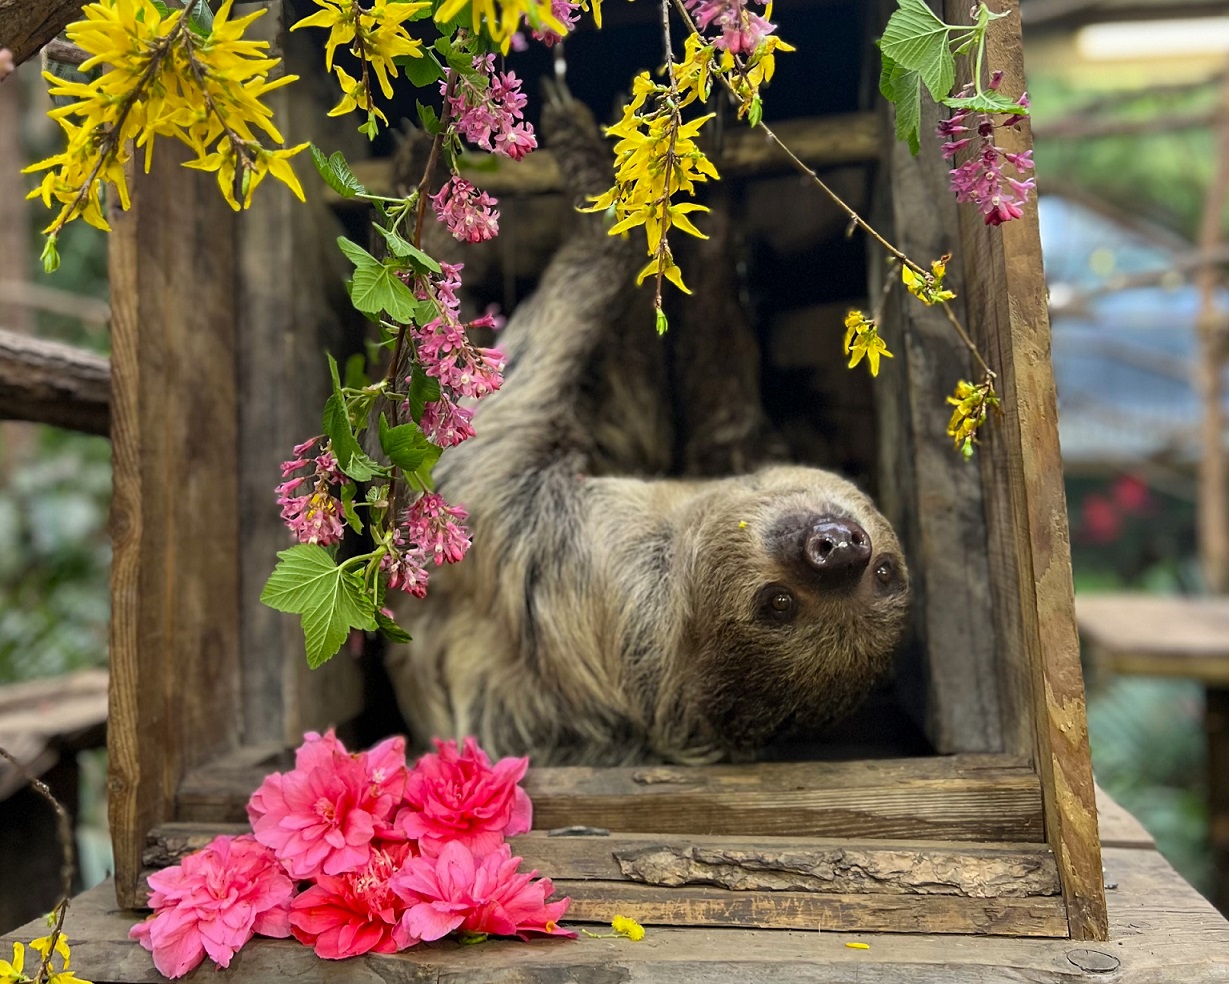 Female sloth Feira looking at camera. She is sat in a box and surrounded by flowers. IMAGE: Amy Middleton 2024